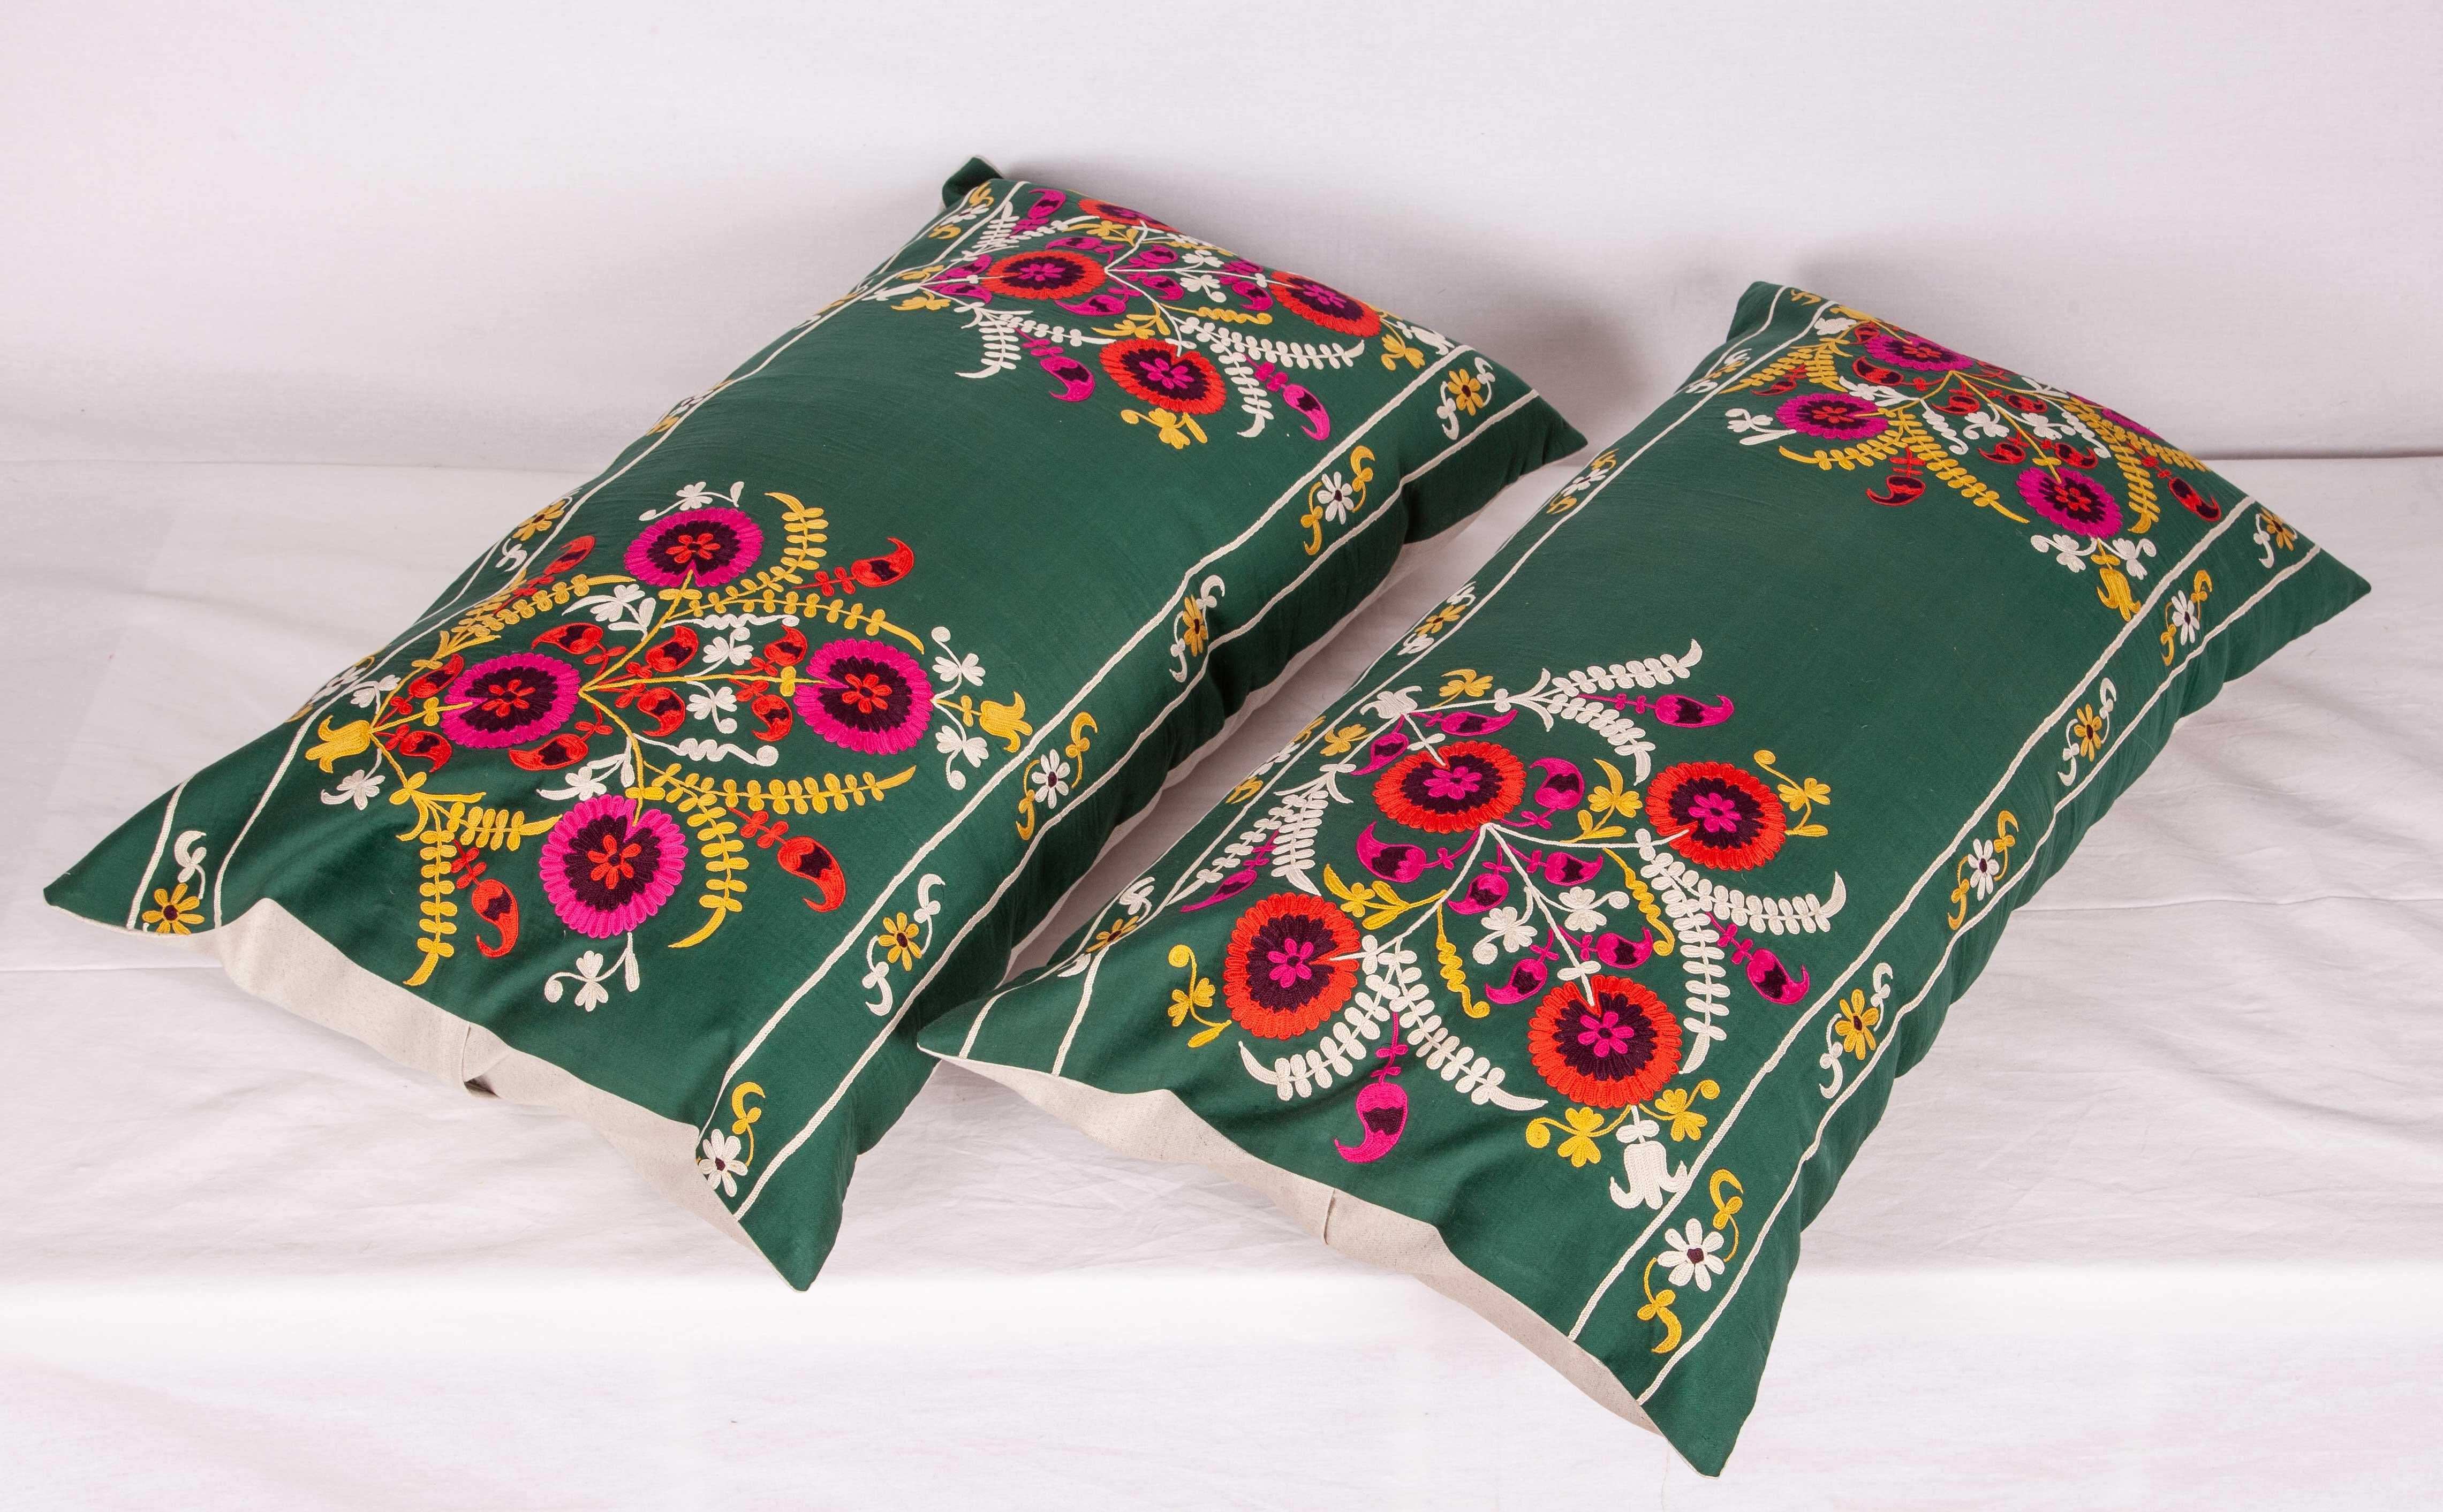 Embroidered Vintage Suzani Pillow Case, Cuhion Cover, Mid-20th Century